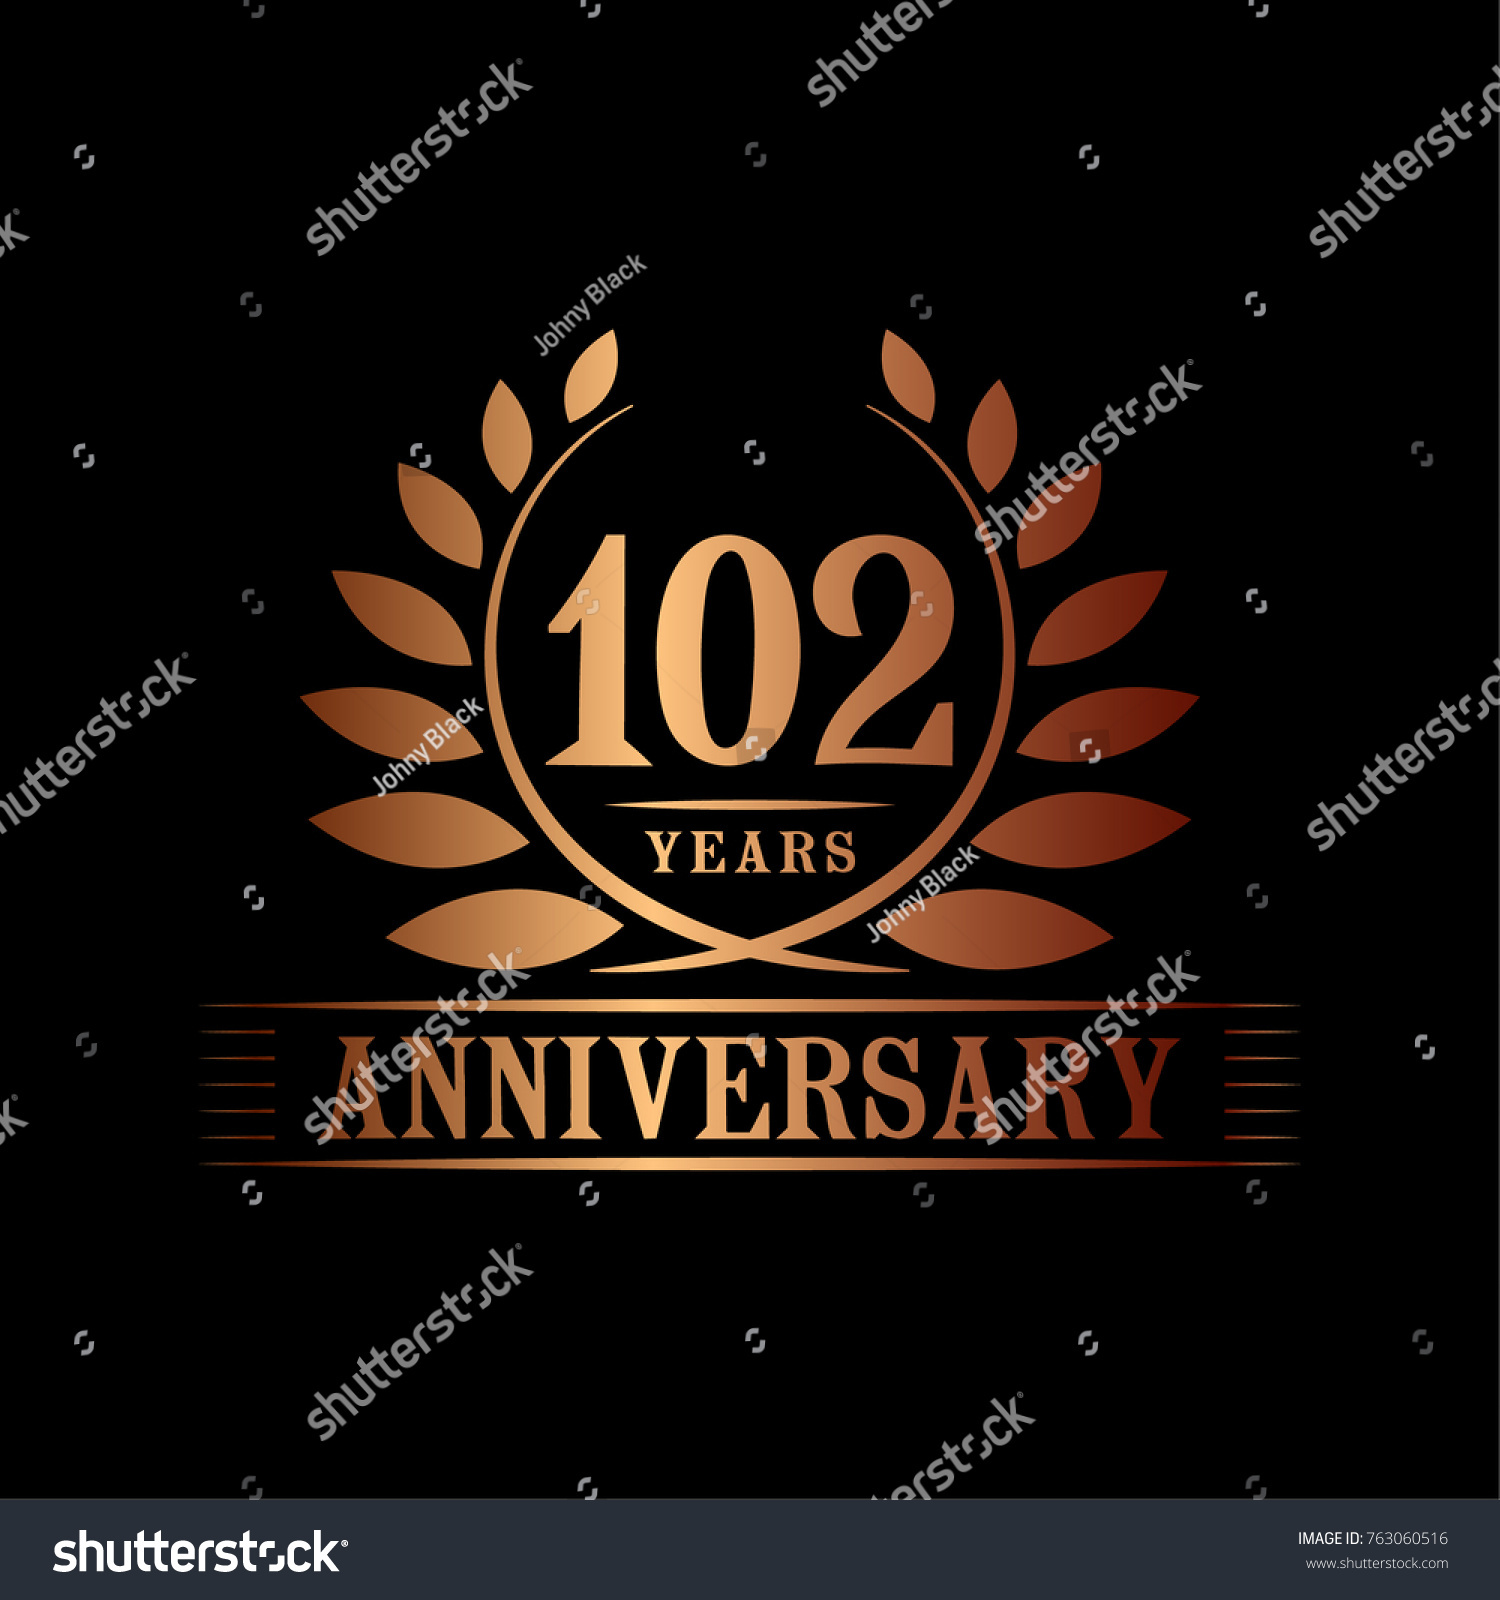 SVG of 102 years anniversary logo template. svg